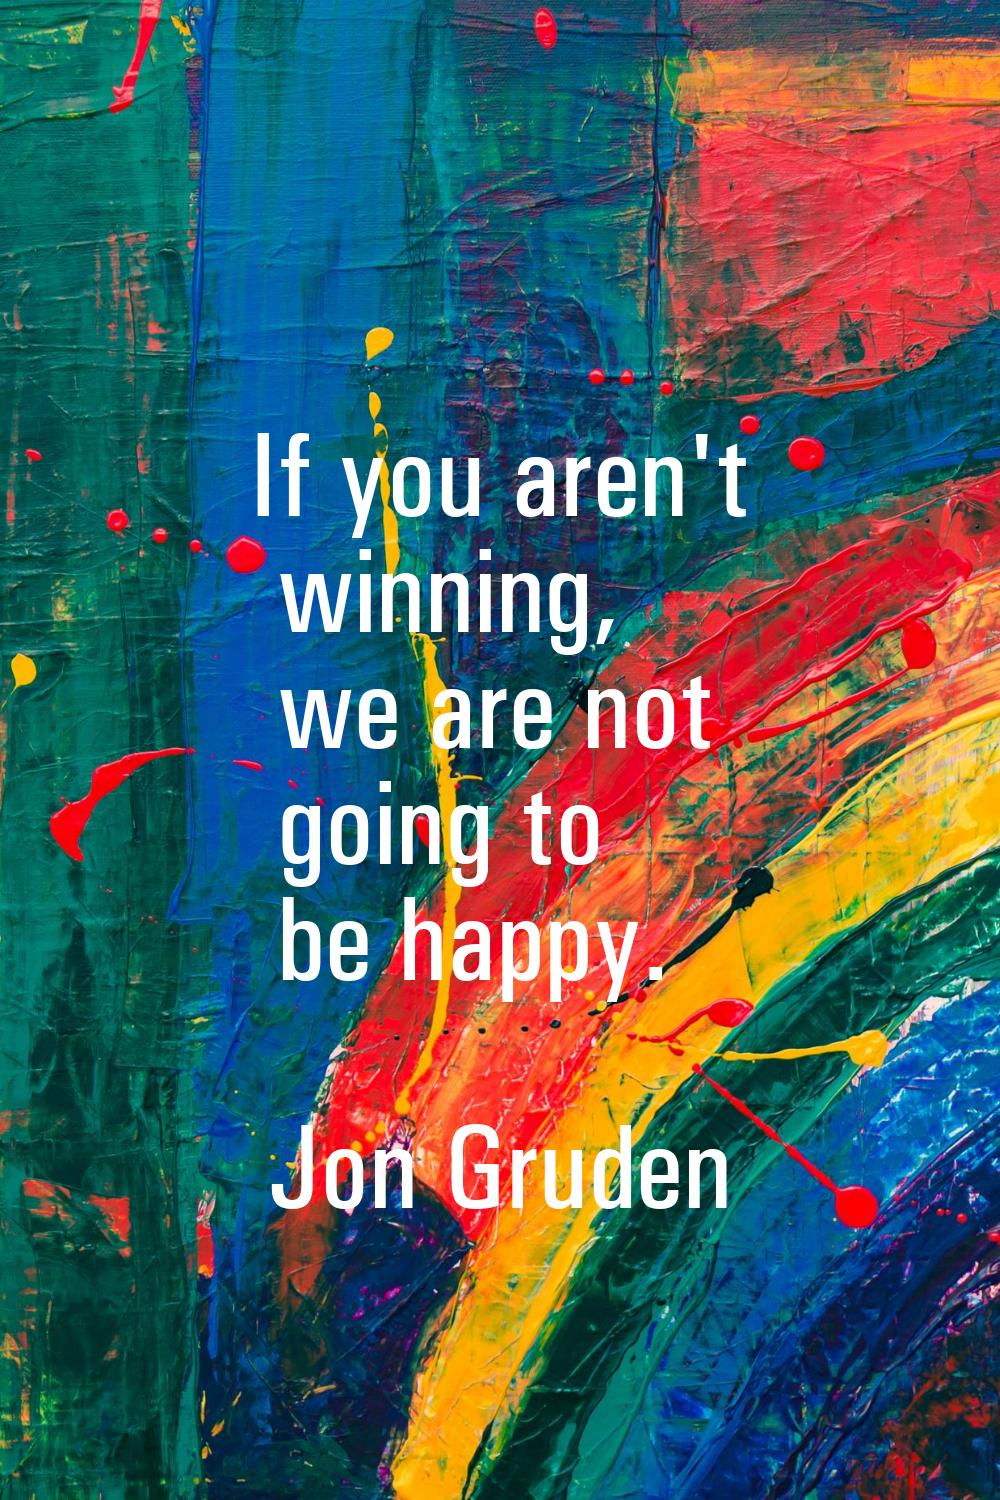 If you aren't winning, we are not going to be happy.